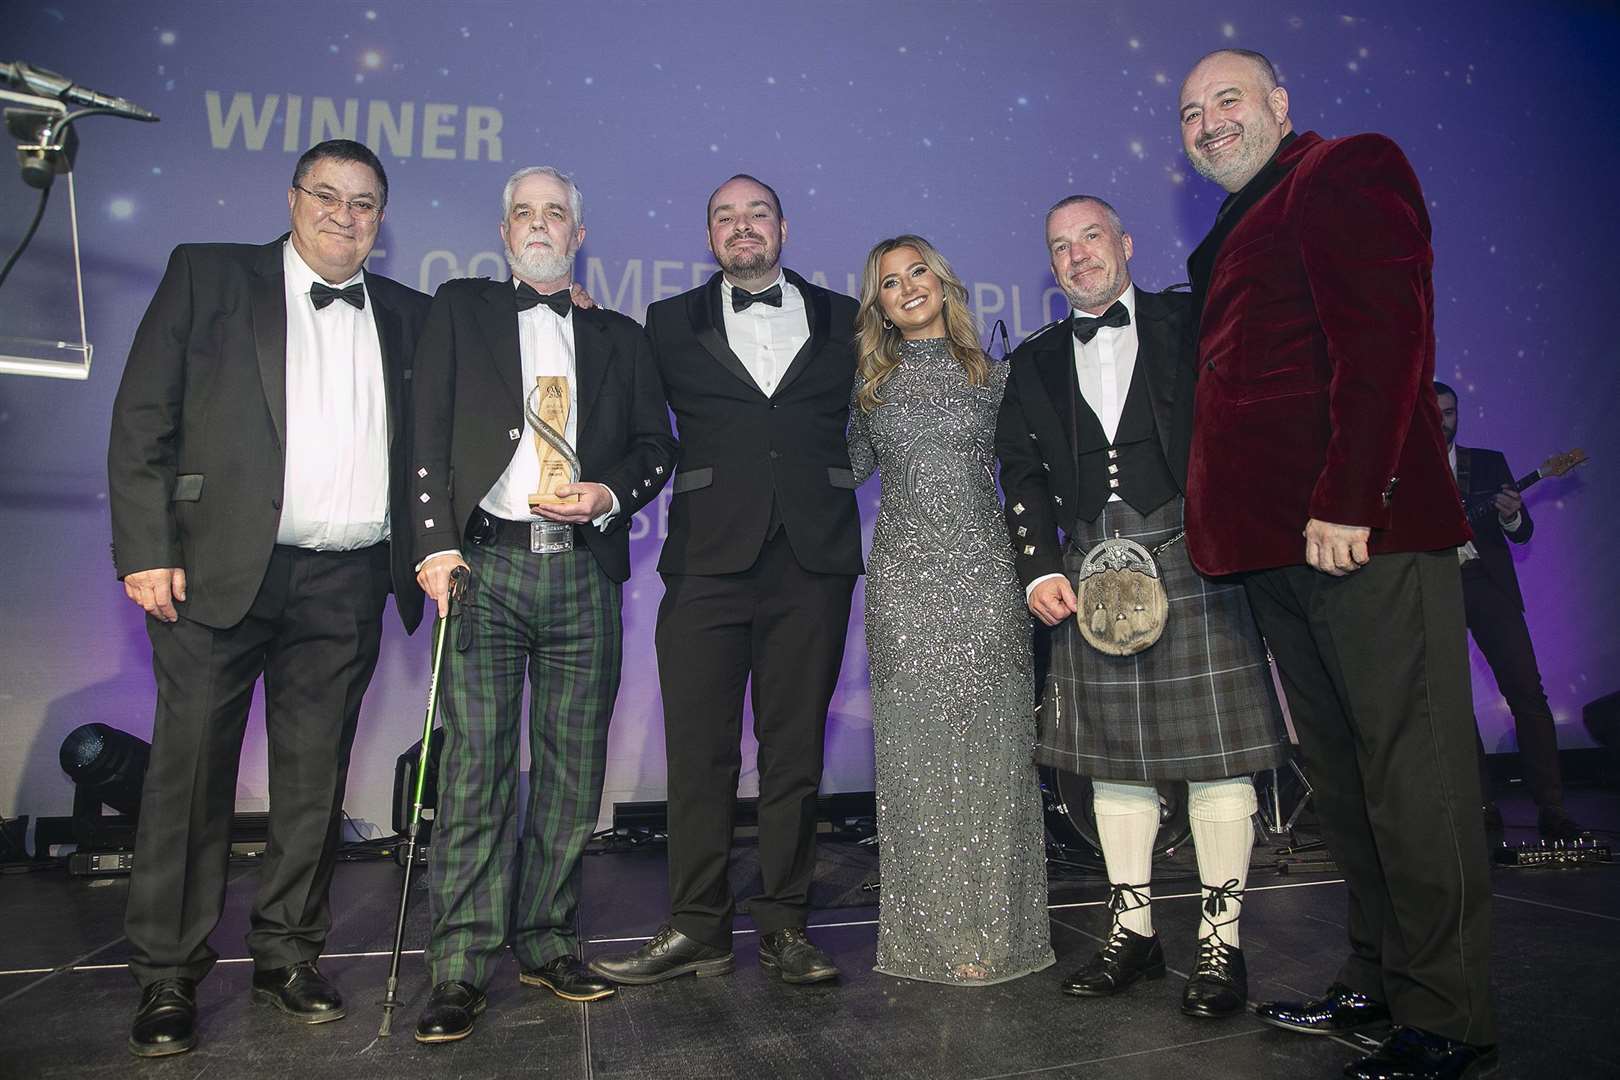 Sentinel Subsea's Neil Gordon,Andrew Jaffrey, Jim Gordon, Amy Connell, Robert Thomson and Wynne Evans were presented with Post-Commercial Deployment Award